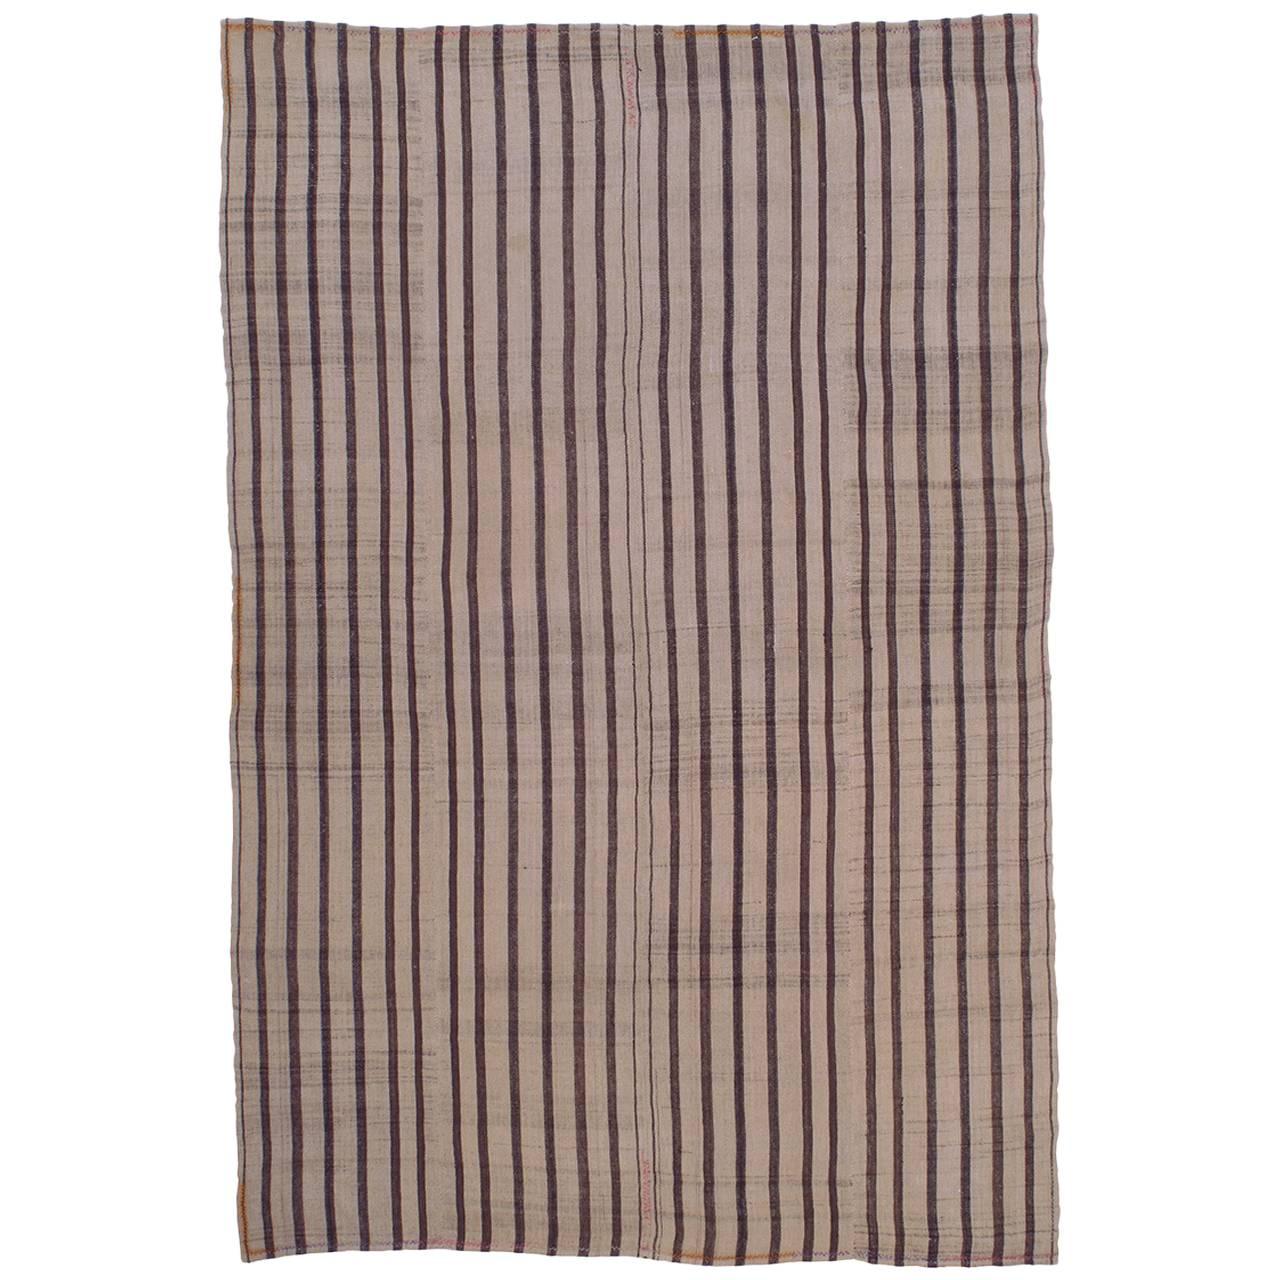 Striped "Jajim" Rug in Brown and Ivory